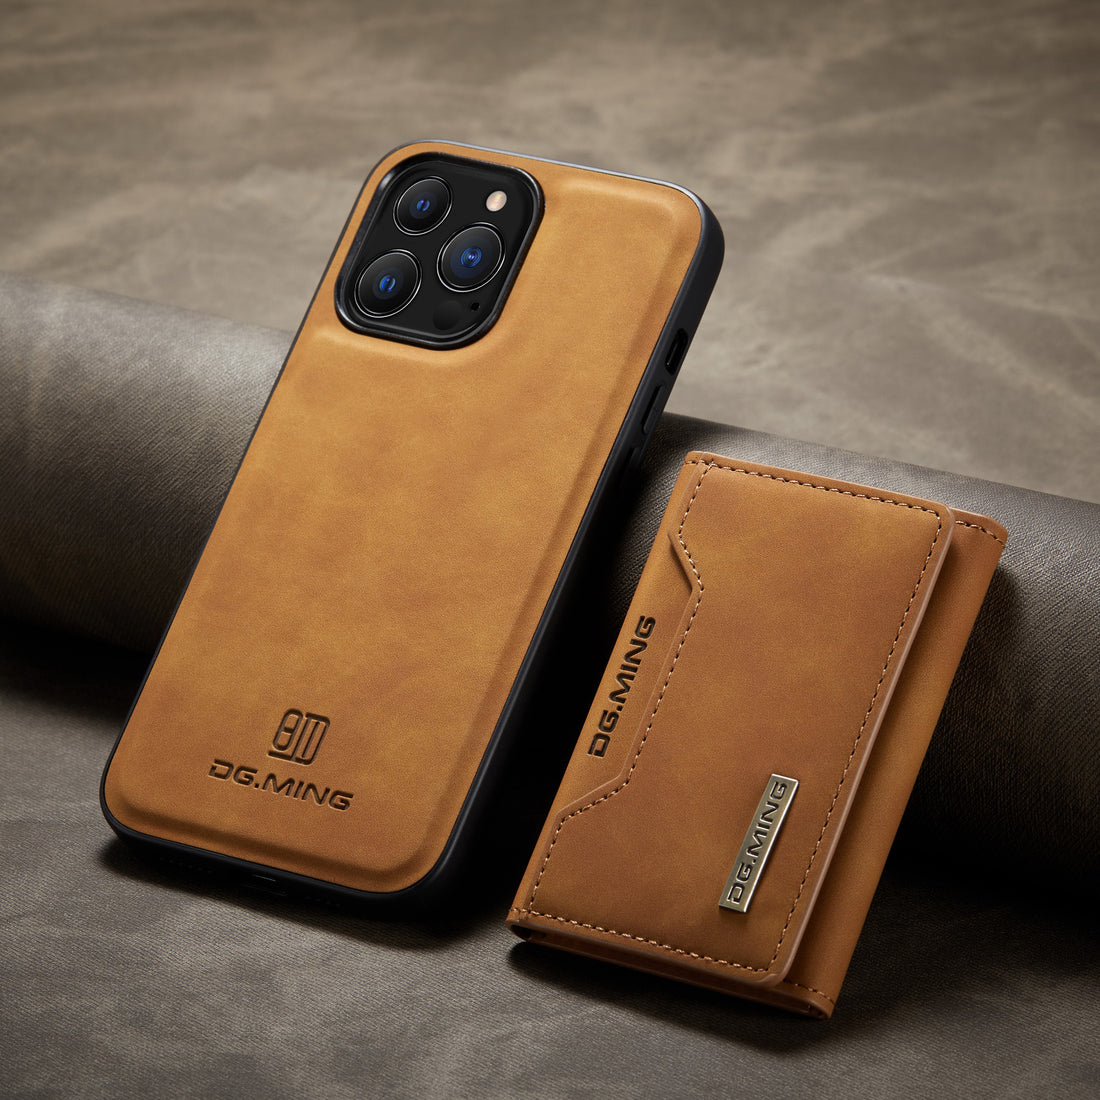 Keep Your iPhone Safe and Stylish with the 2 in 1 Leather Wallet Cover